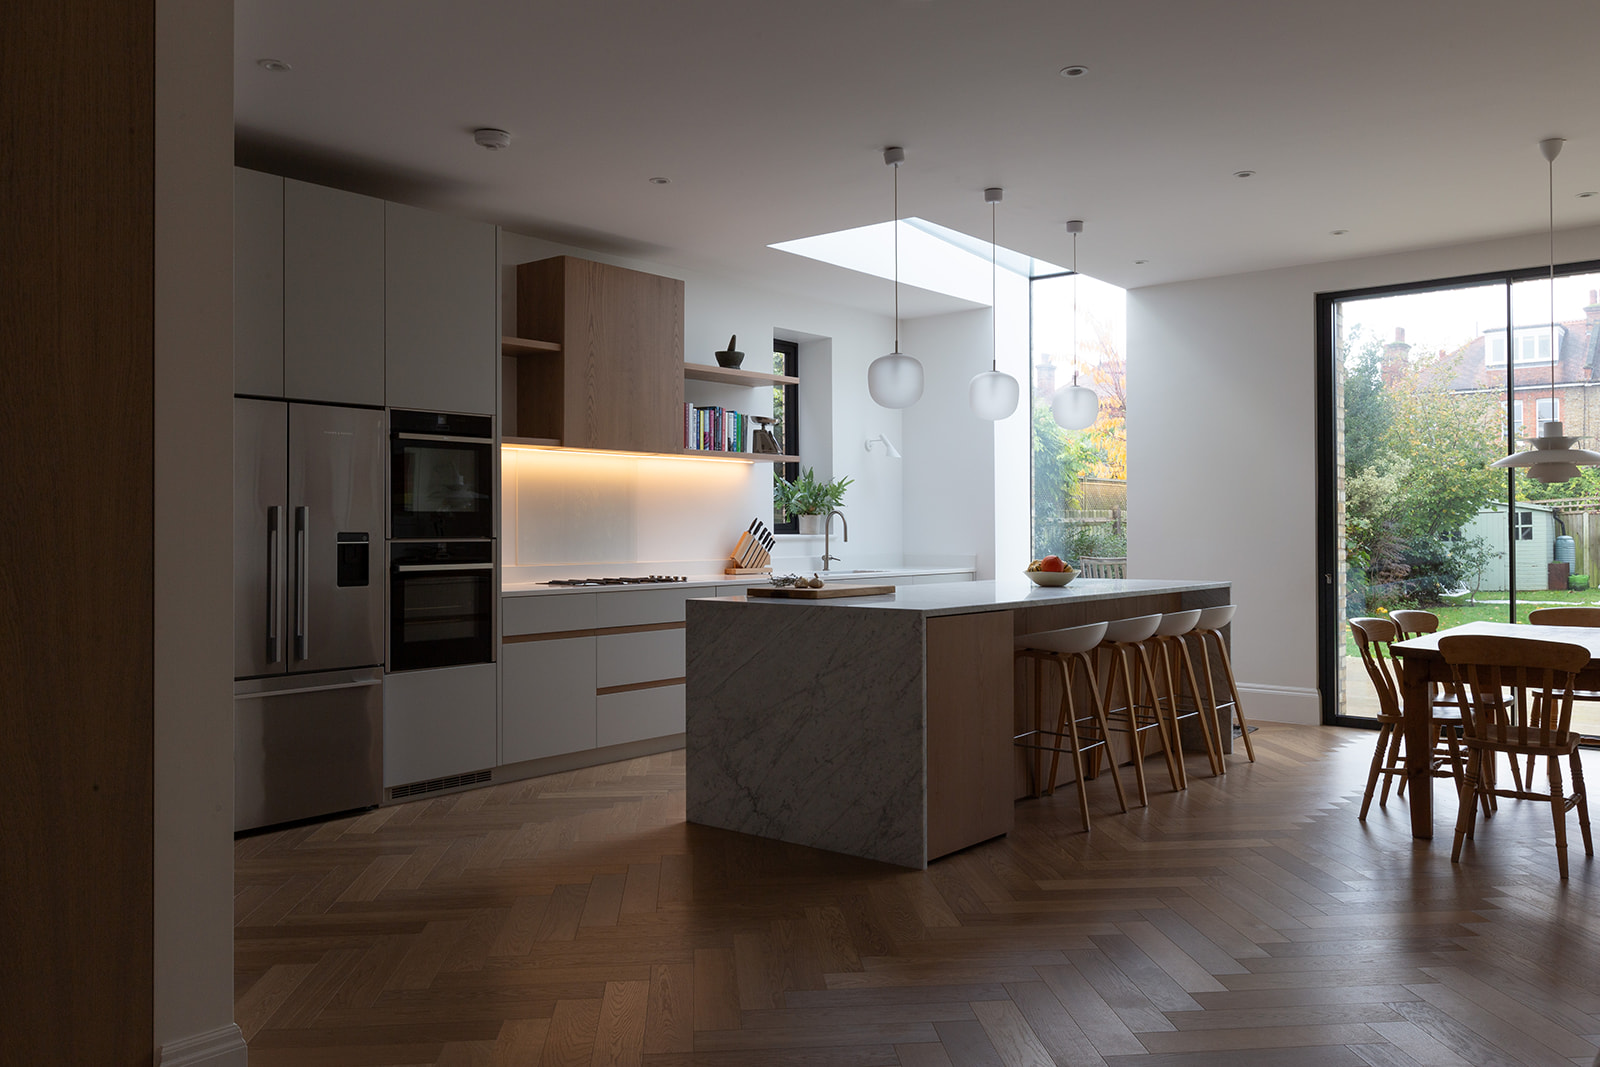 Strong, graphical composition of a recently renovated kitchen